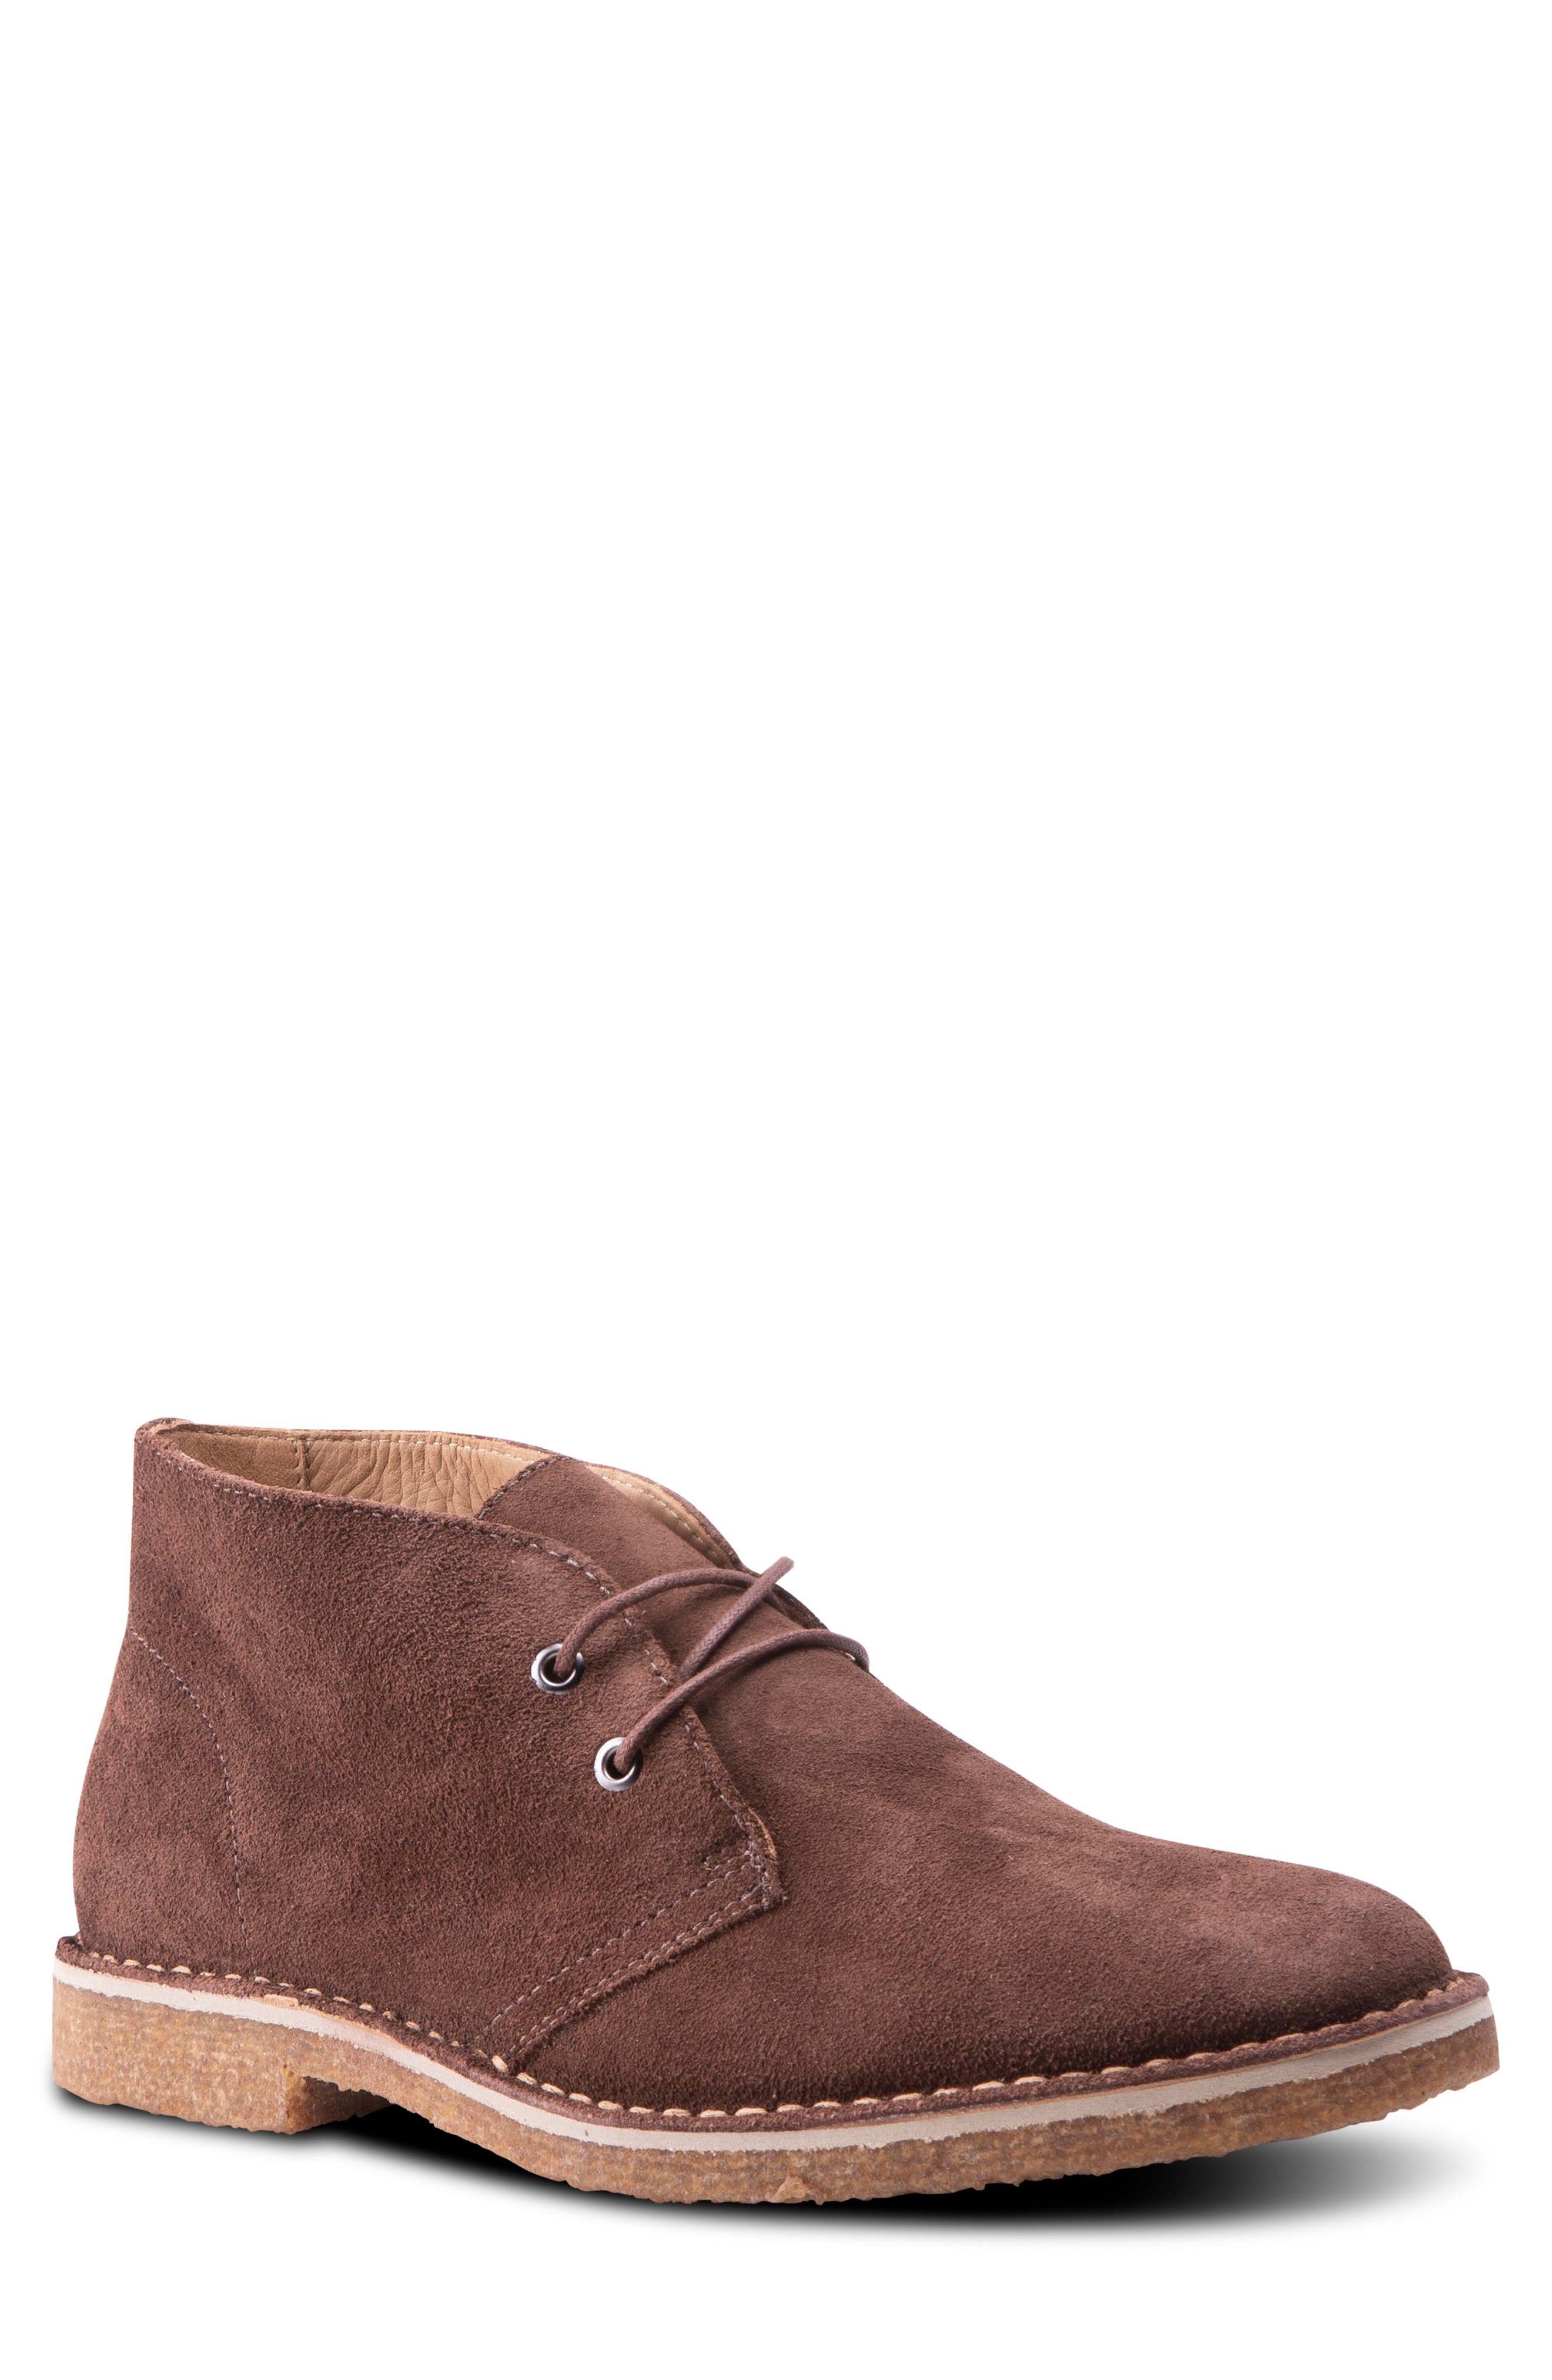 Blake Mckay Toby Chukka Boot in Grey Suede at Nordstrom